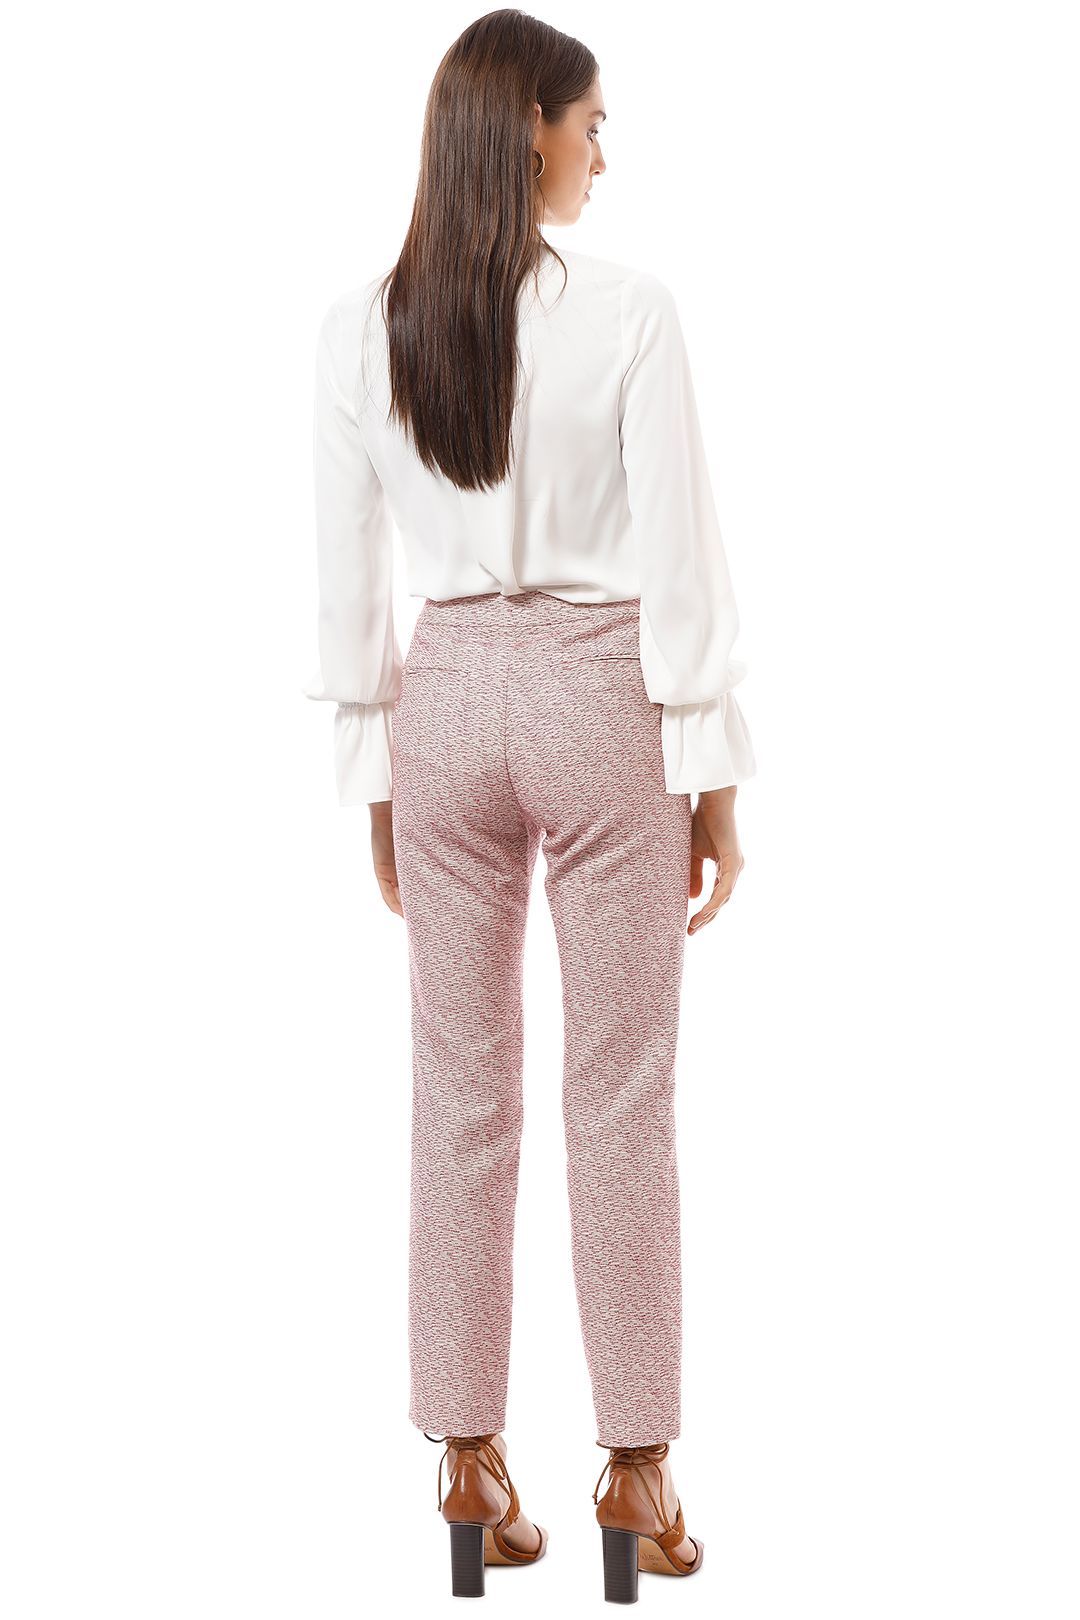 Max and Co - Carezza Pants - Pink - Back